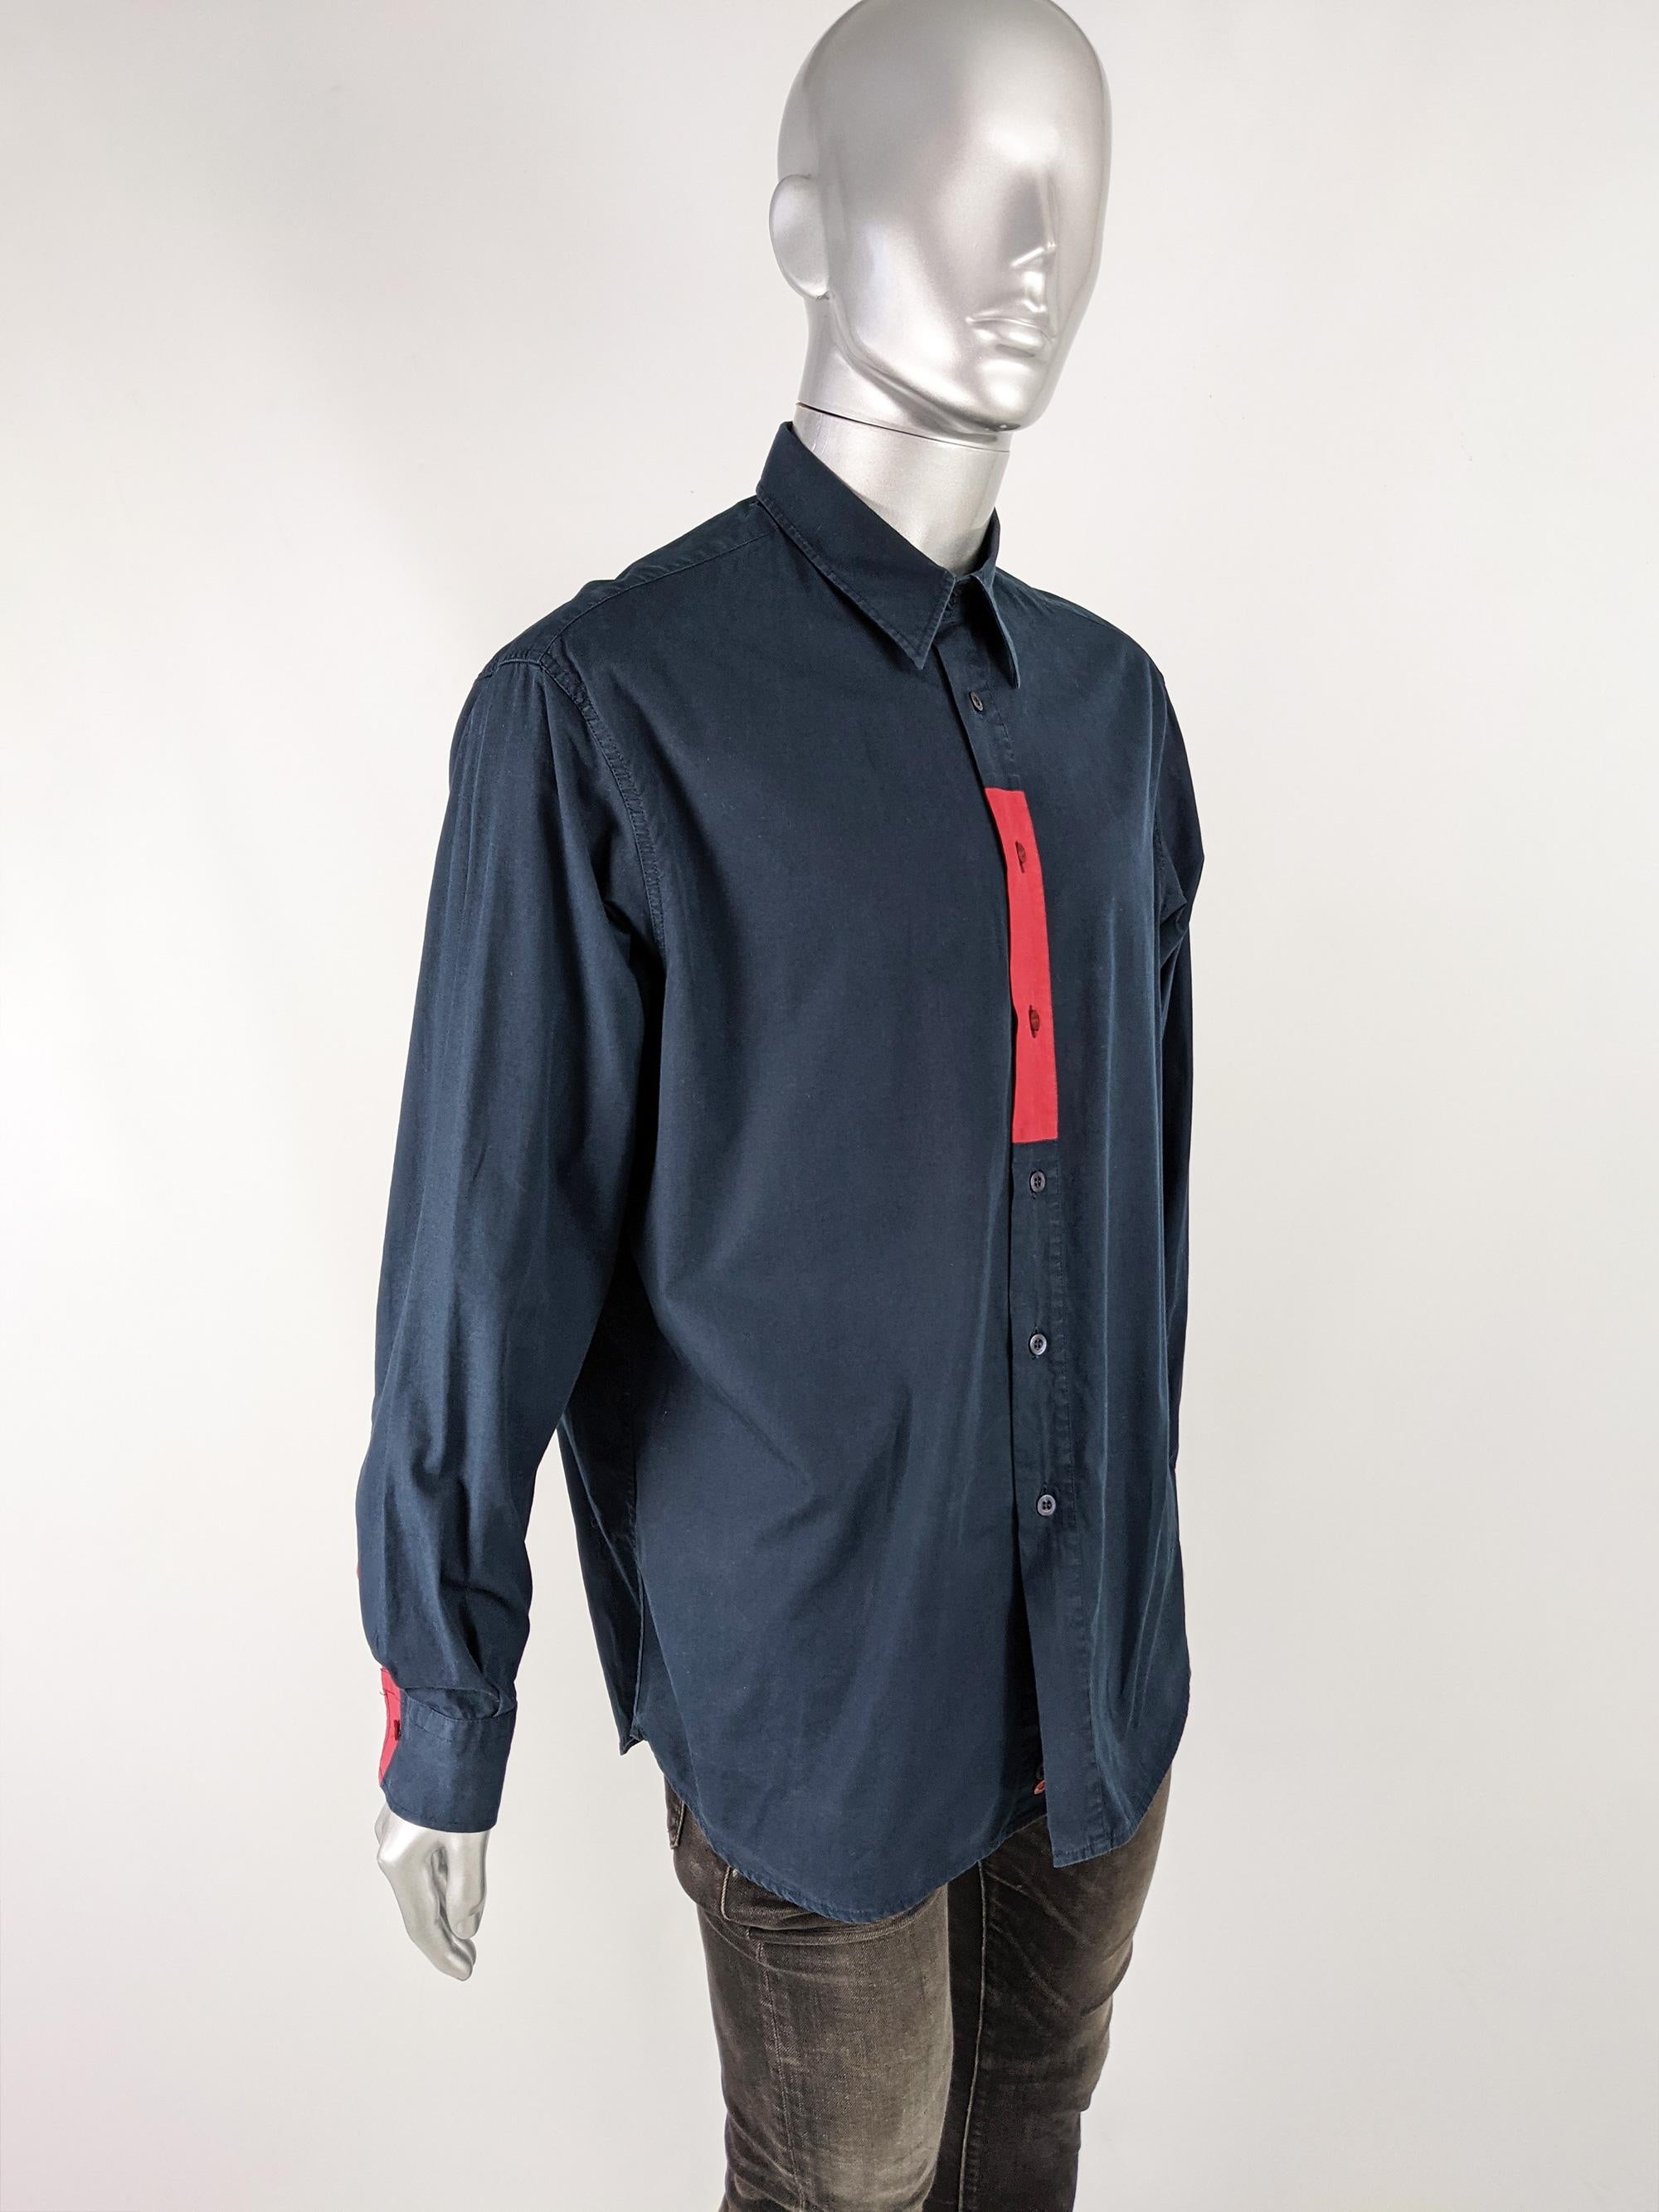 Black Moschino Vintage Navy Blue & Red Shirt 1990s Long Sleeve Shirt Buttoned Shirt For Sale